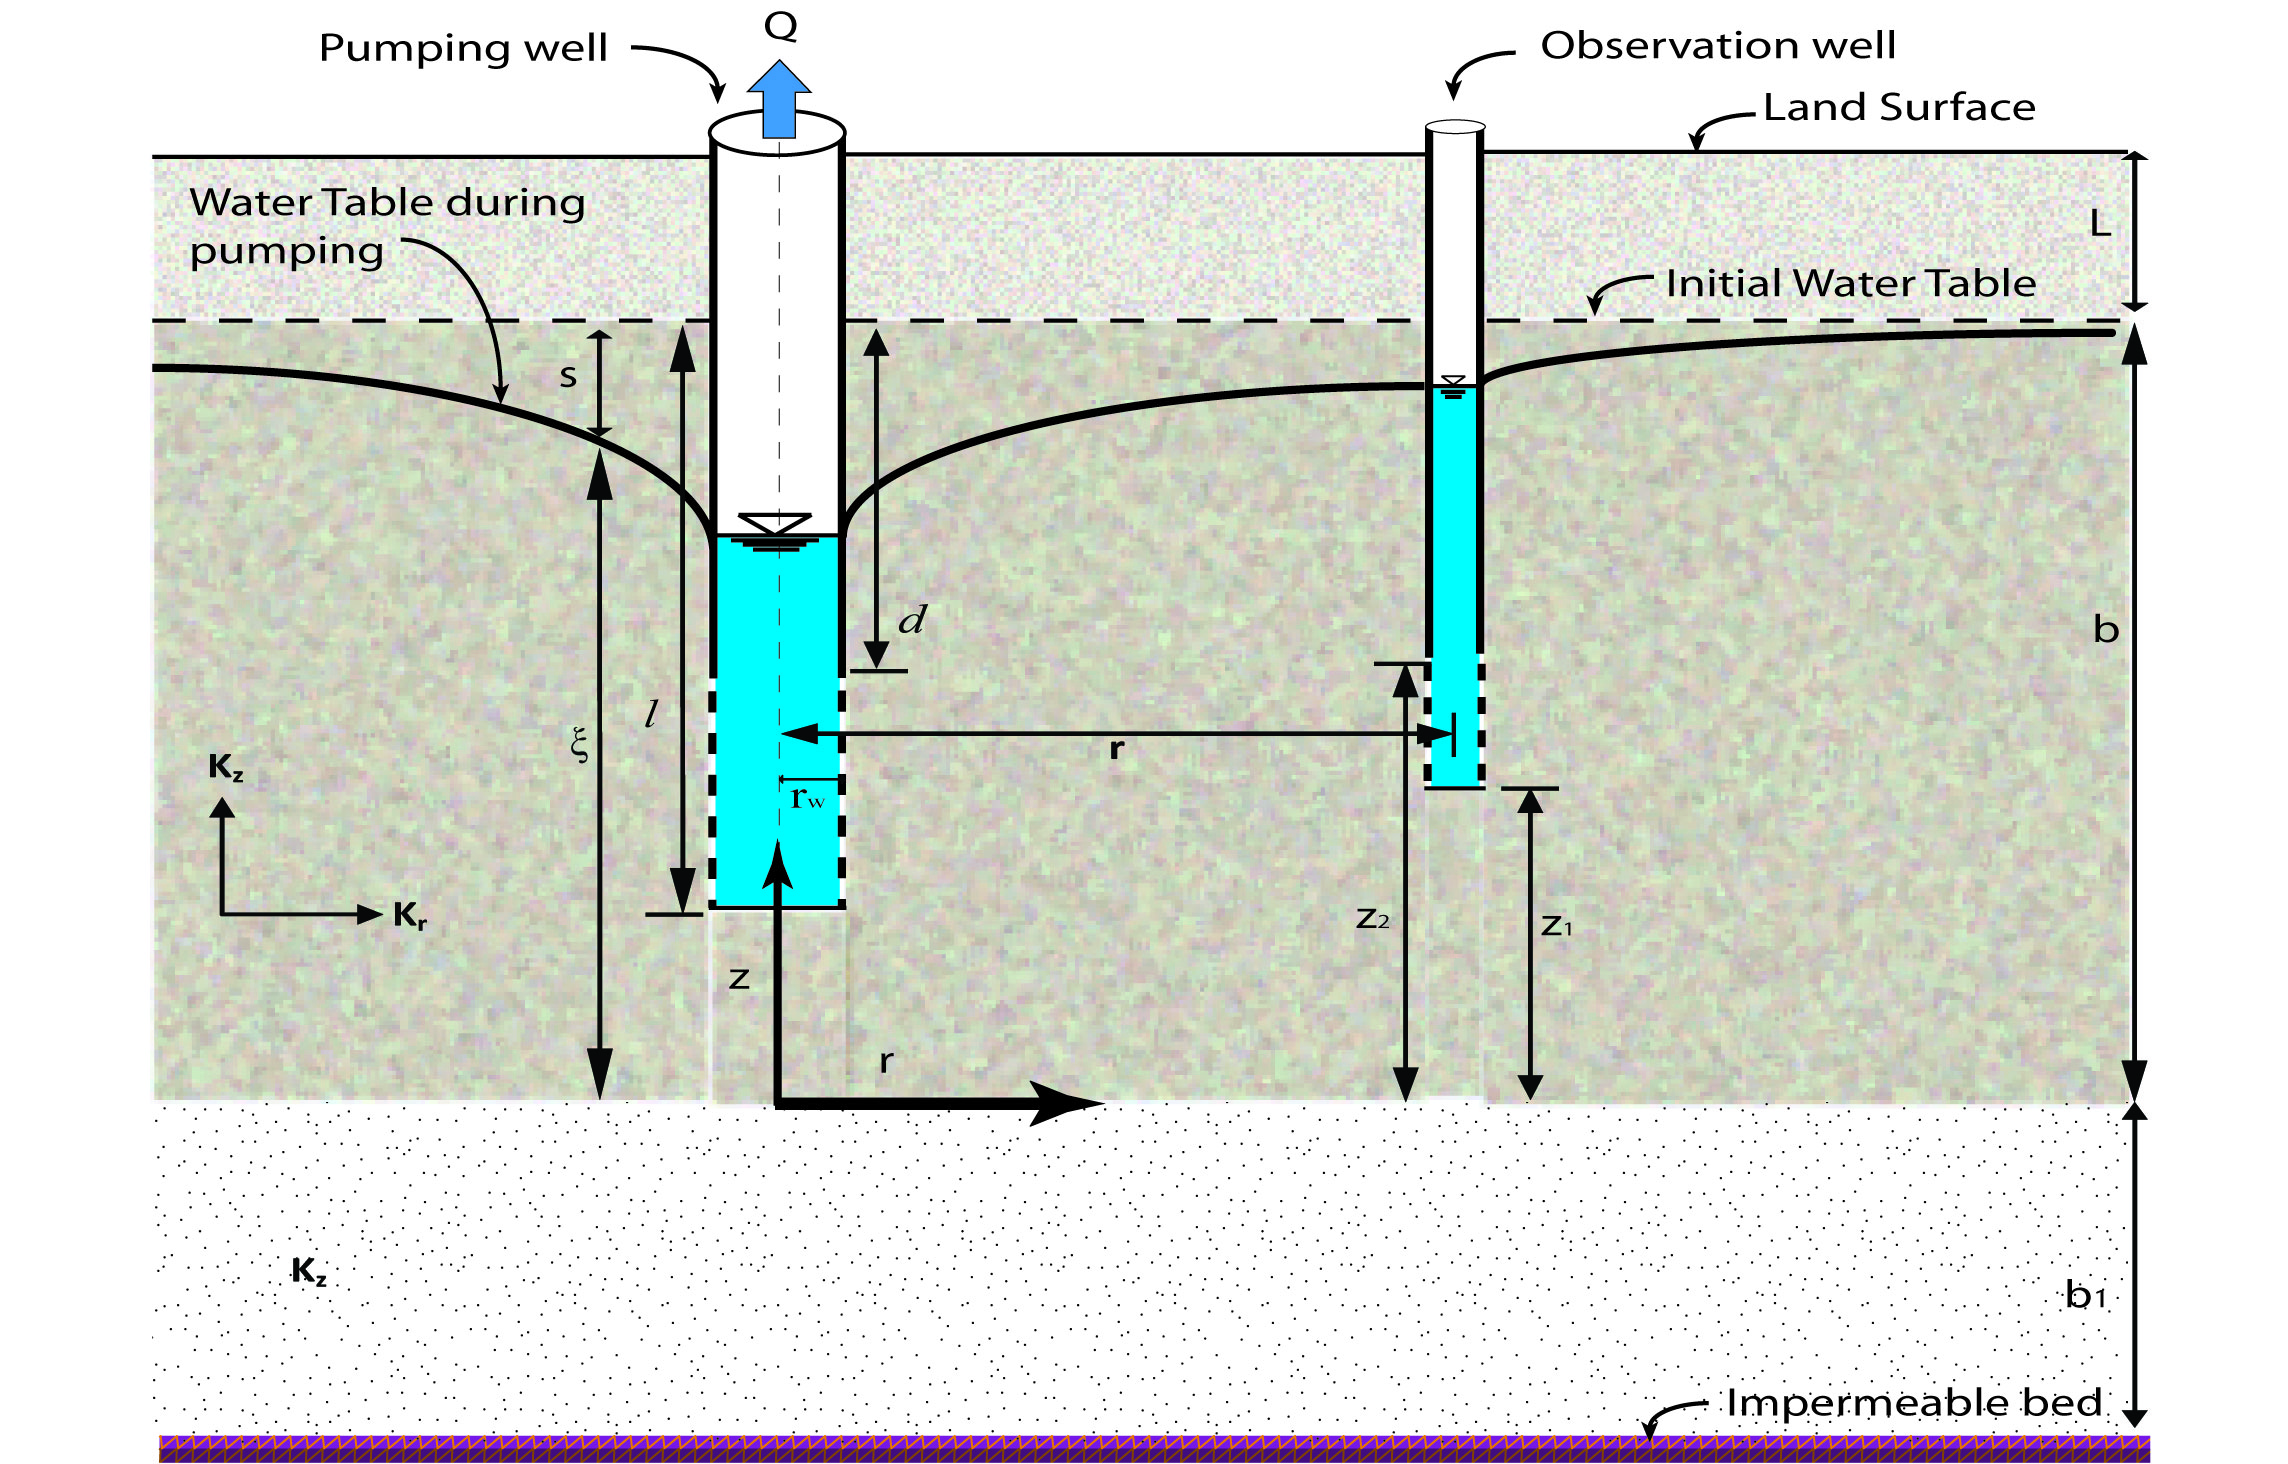 Schematic of leaky unconfined Aquifer